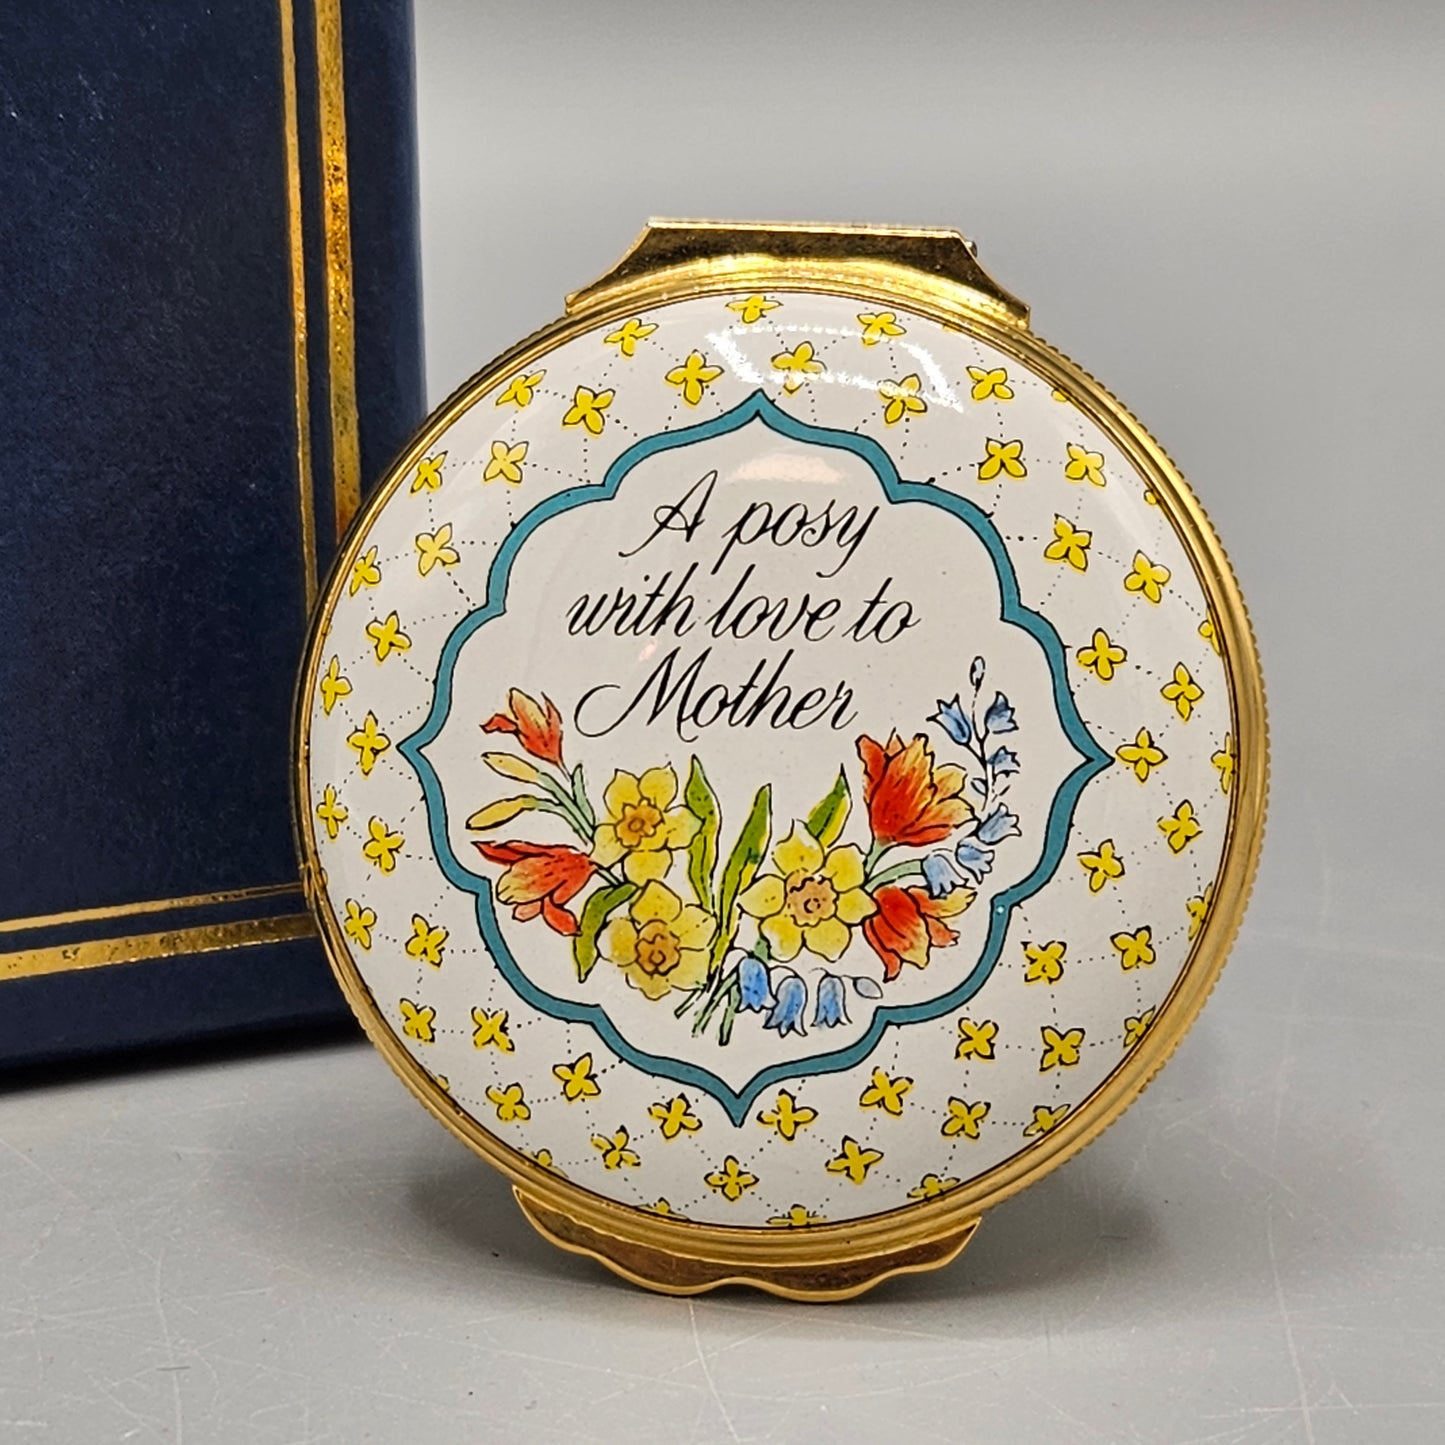 1989 Halcyon Days Enamel "A posy with Love to Mother" Mother's Day Box